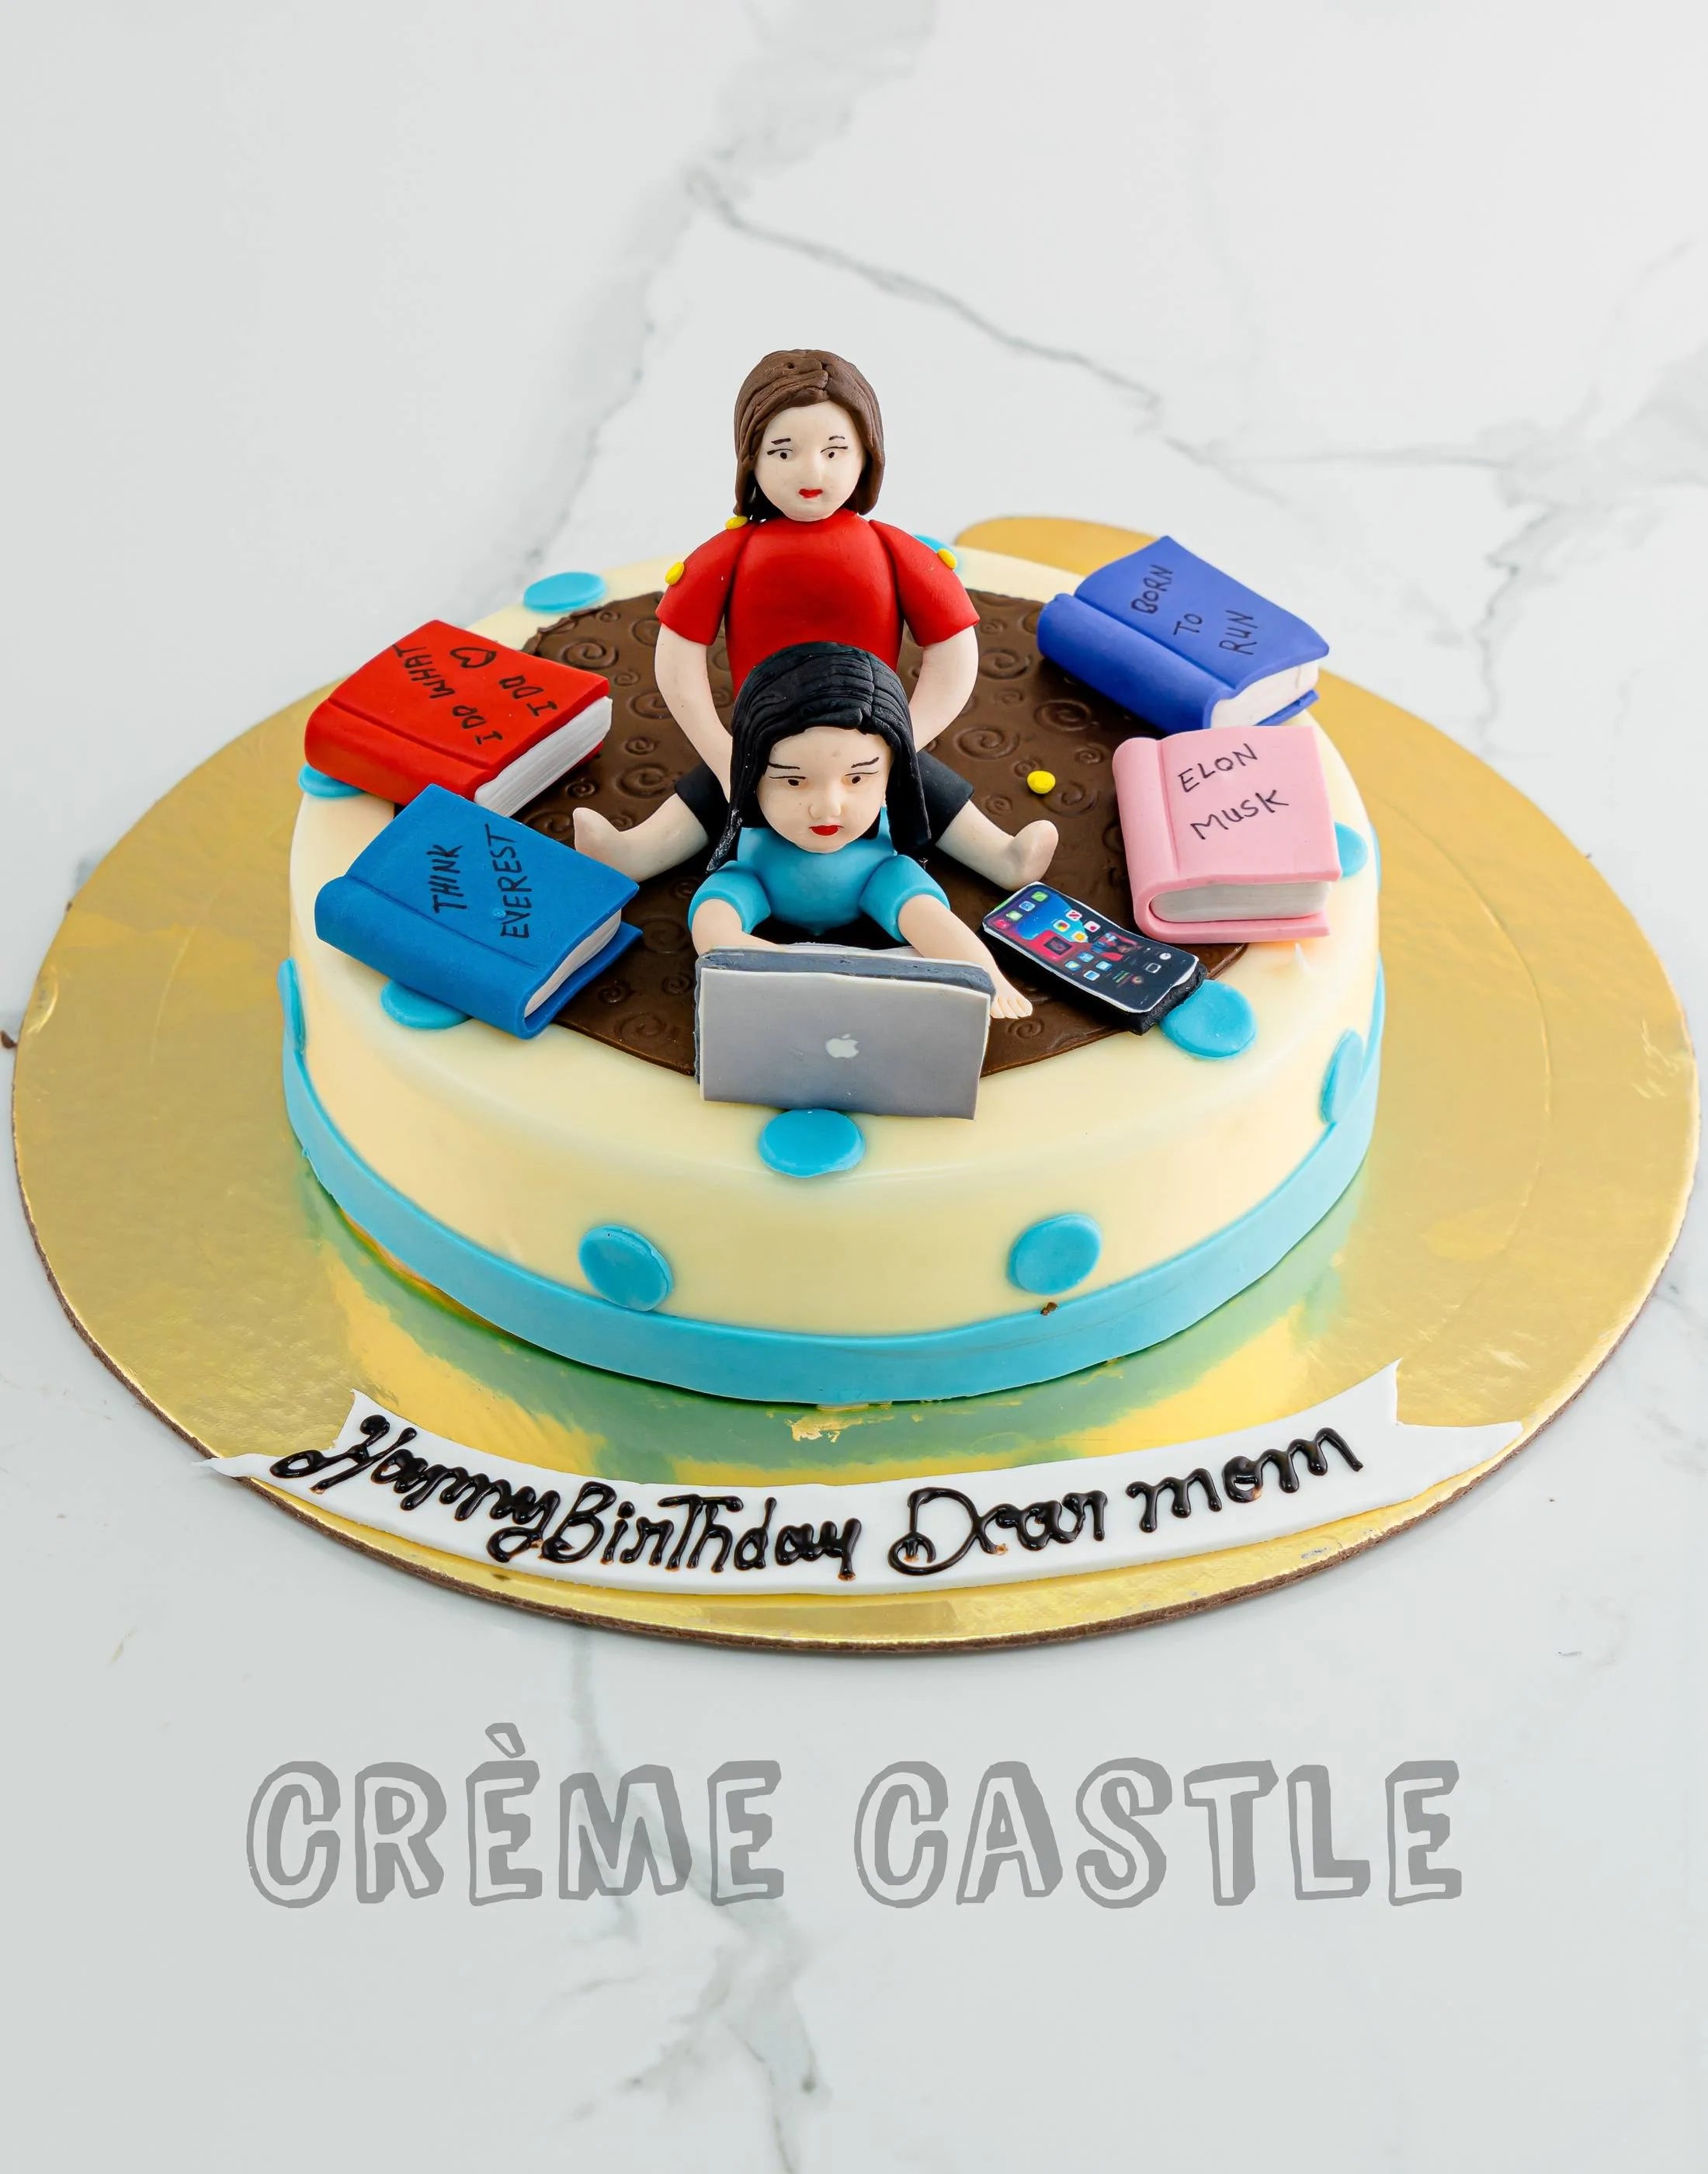 Baby and Working mother theme cake - Customized Cakes Ideas in Noida – Creme Castle